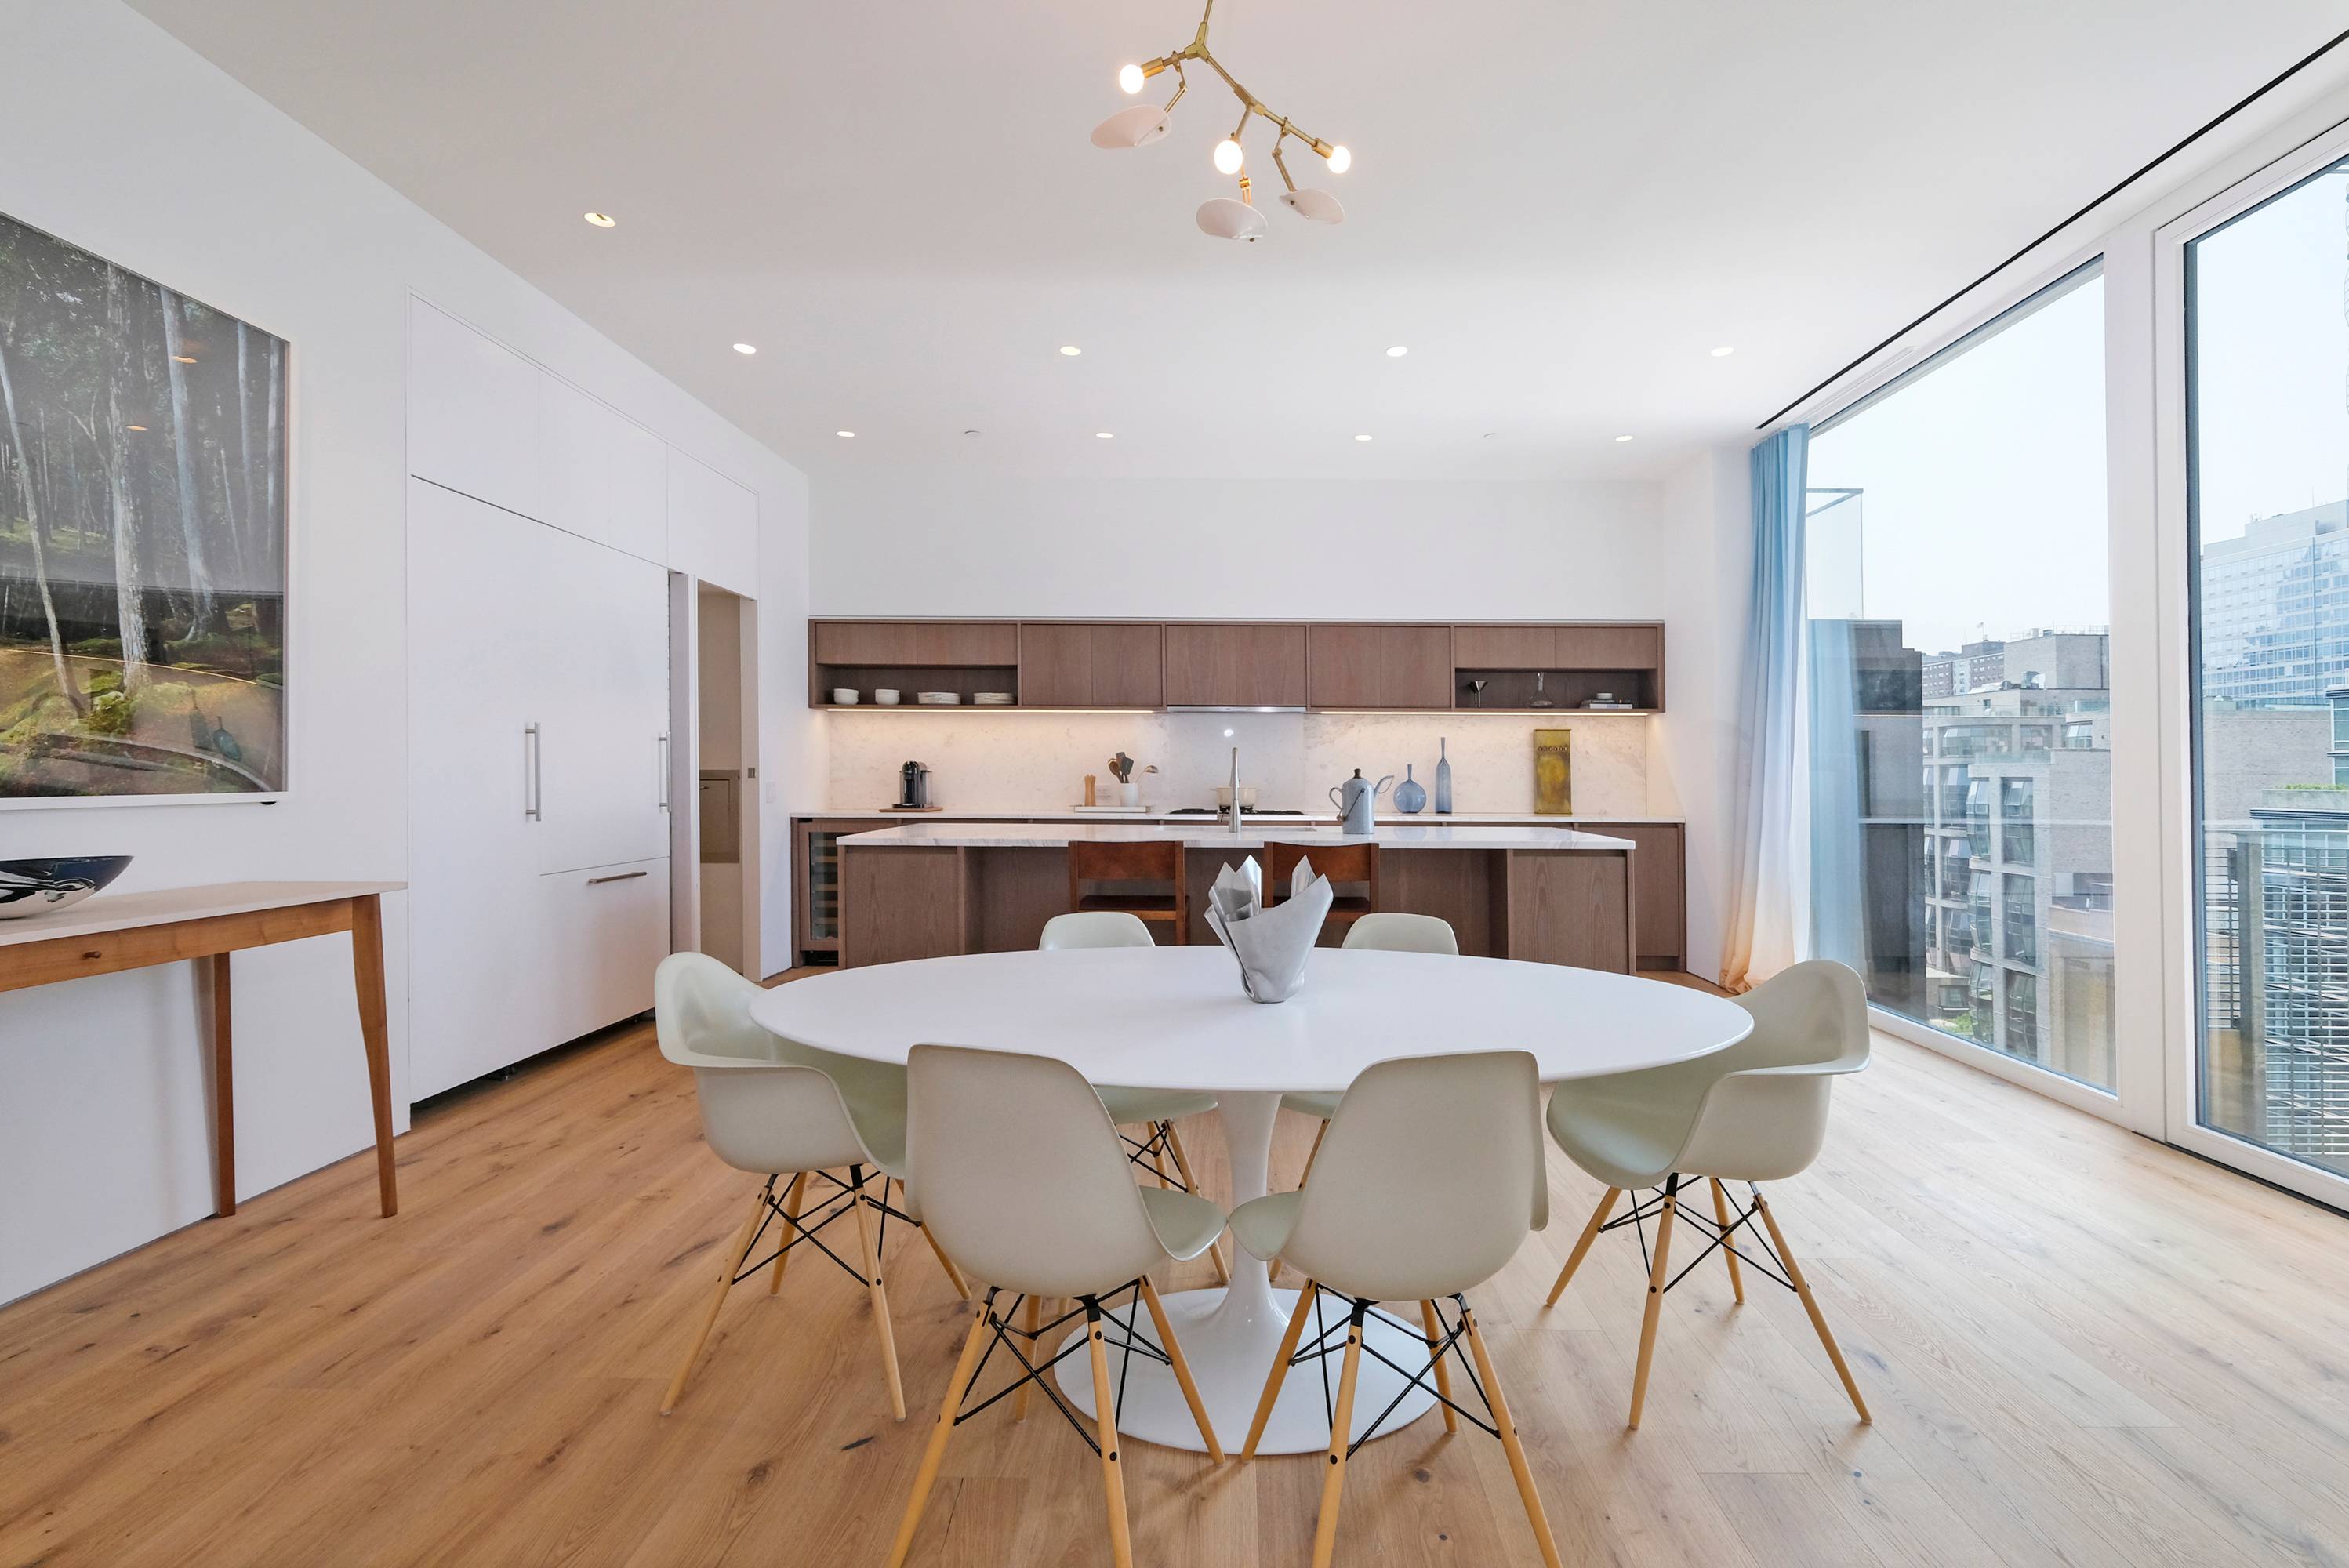 SPONSOR INCENTIVE FOR LAST UNIT REMAINING Sponsor to pay 50 of common charges for 2 years Residence 9 at 532 West 20th Street is an exquisitely crafted 2, 694 SF ...